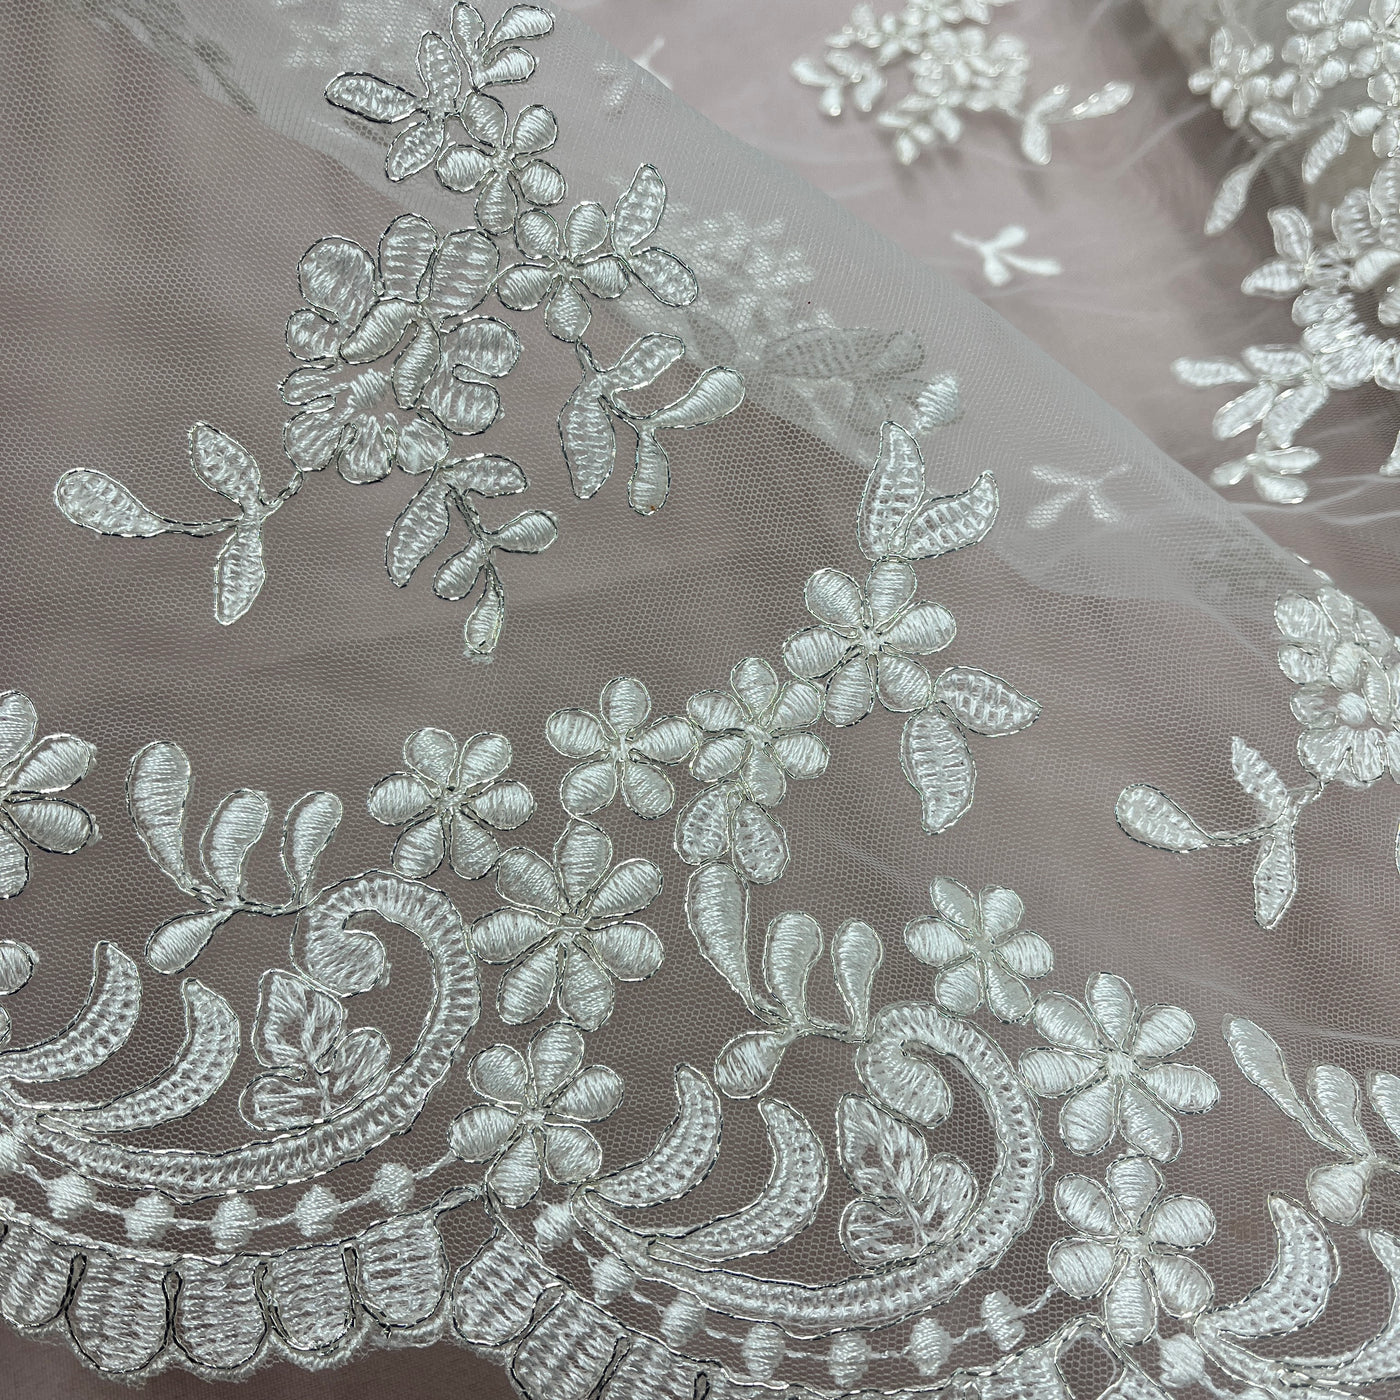 Corded Bridal Lace Fabric Embroidered on 100% Polyester Net Mesh | Lace USA - 91436W